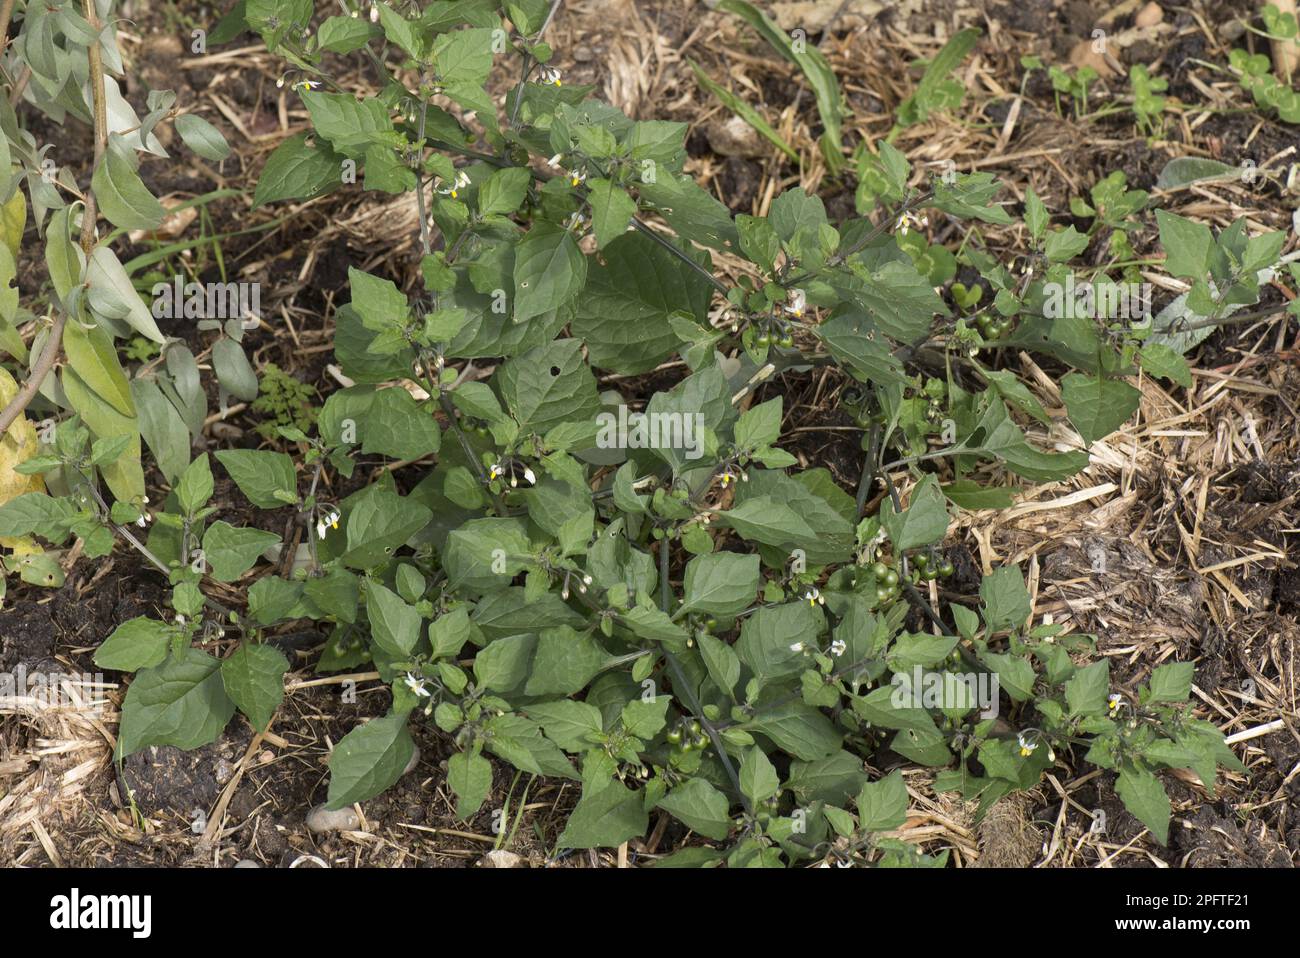 European black nightshade (Solanum nigrum), flowering plant of an annual field weed with small white flowers and immature green berries, Berkshire Stock Photo